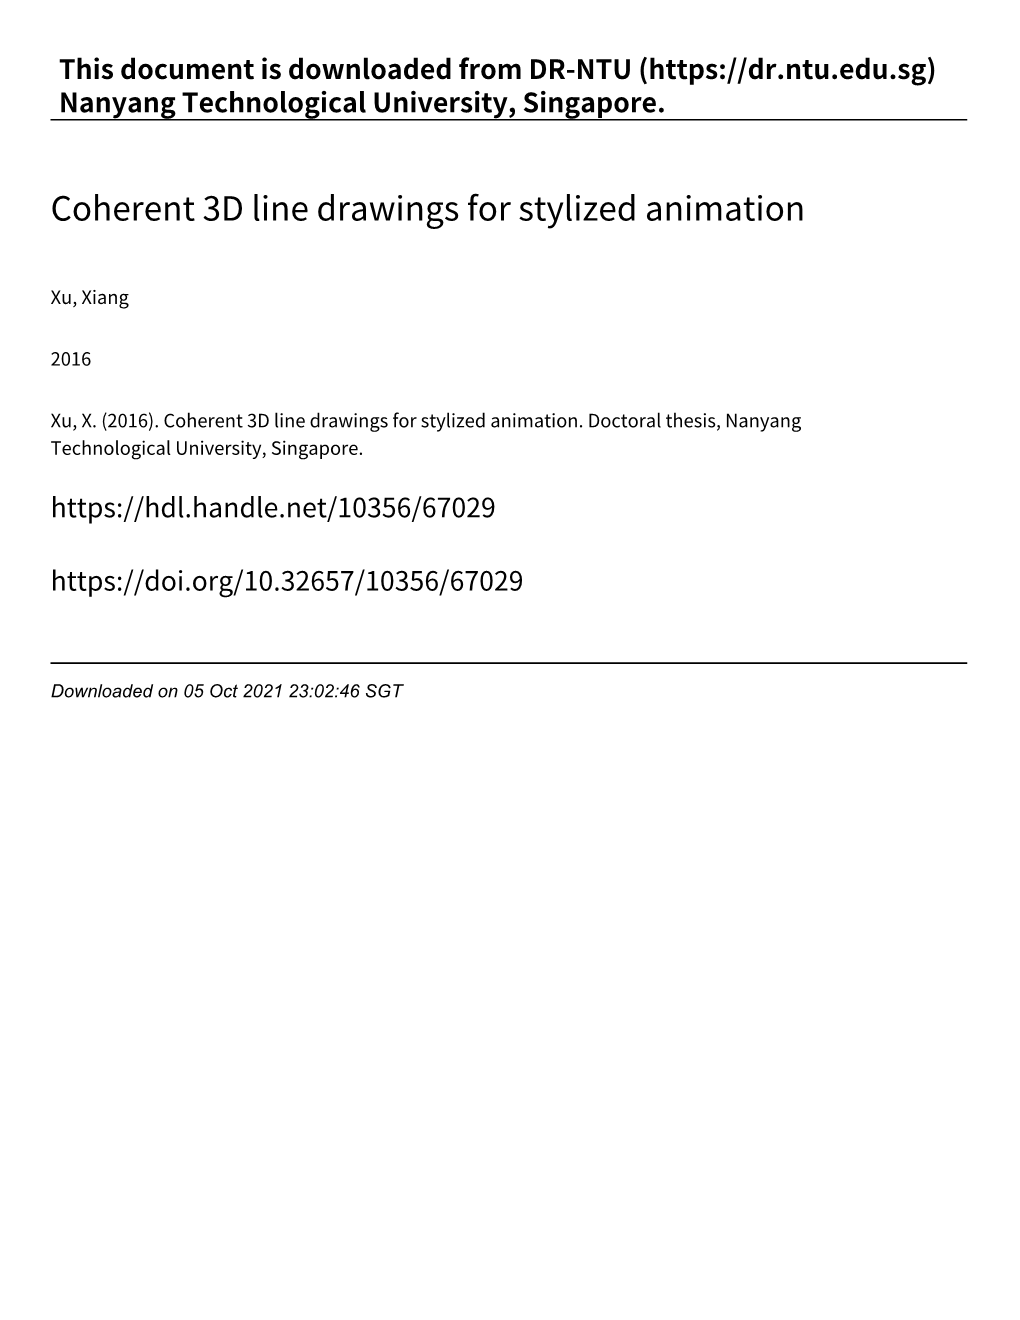 Coherent 3D Line Drawings for Stylized Animation